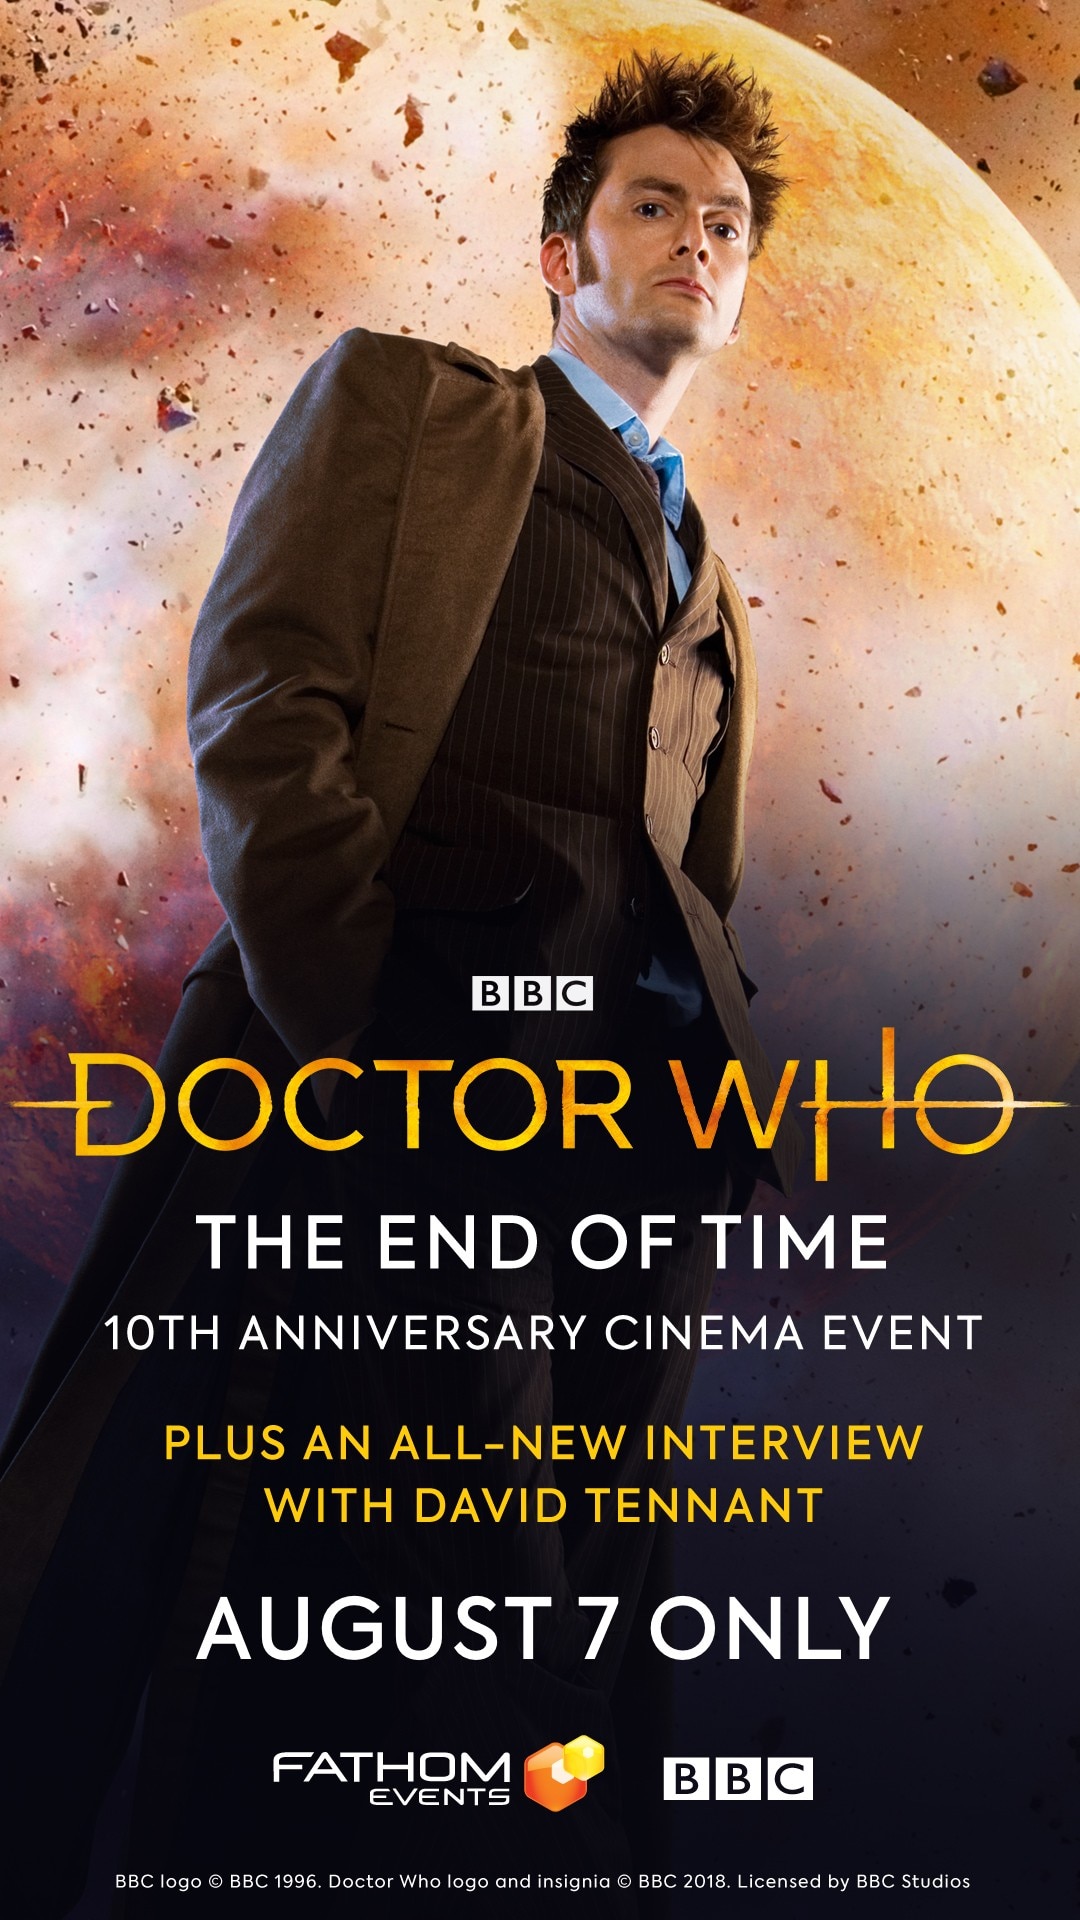 David Tennant’s final Doctor Who adventure ‘The End of Time’ comes to U